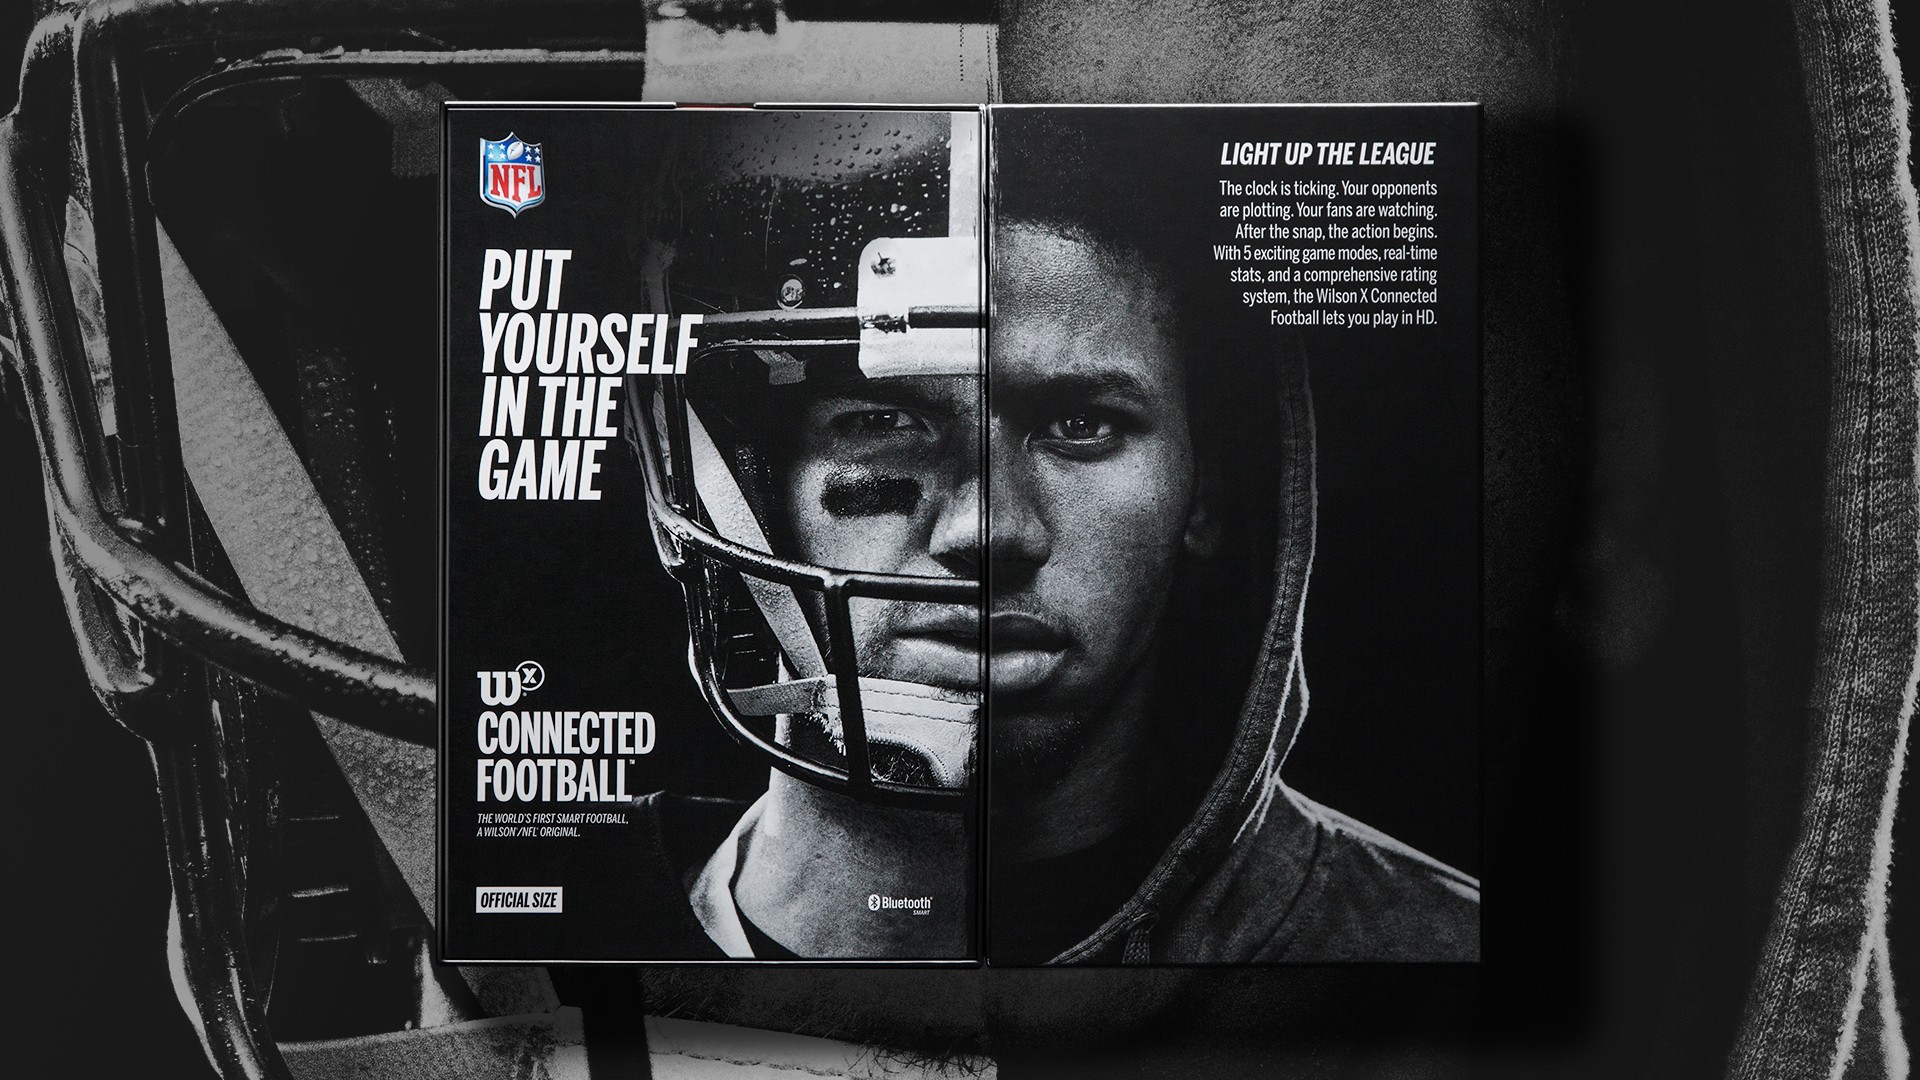 Wilson X Connected Football Packaging